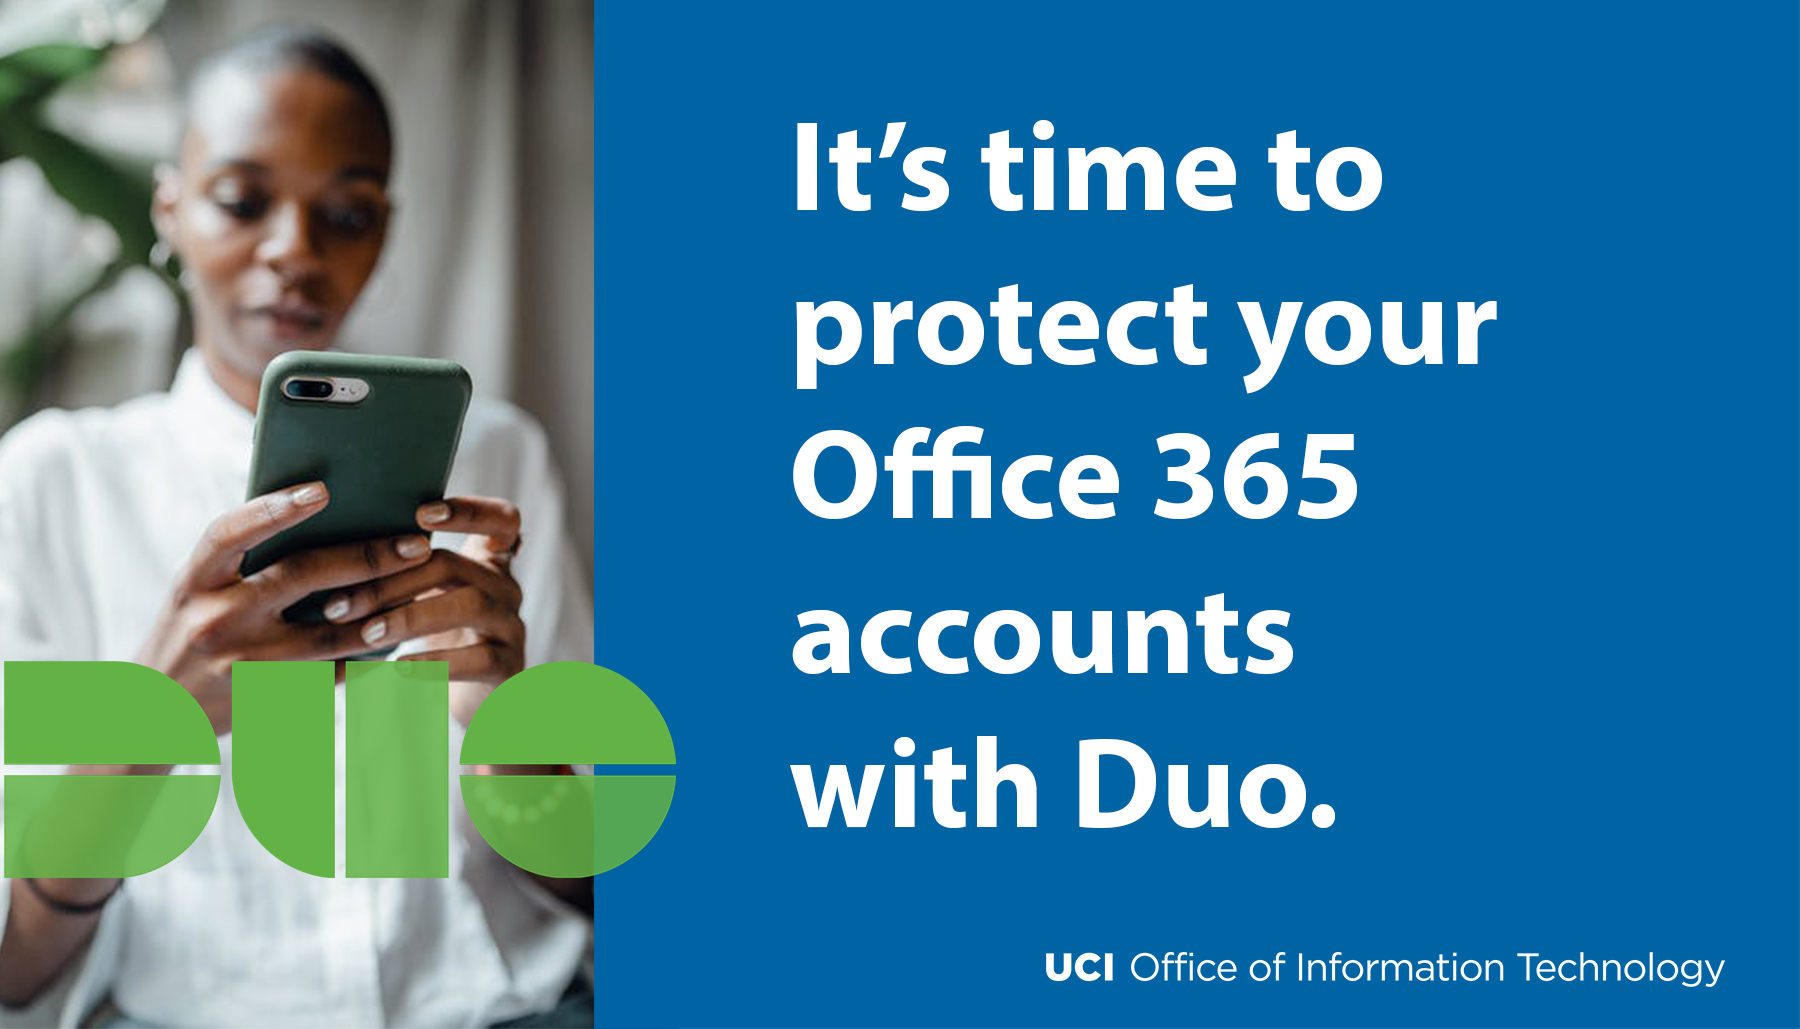 It's time to protect your Office 365 accounts with Duo